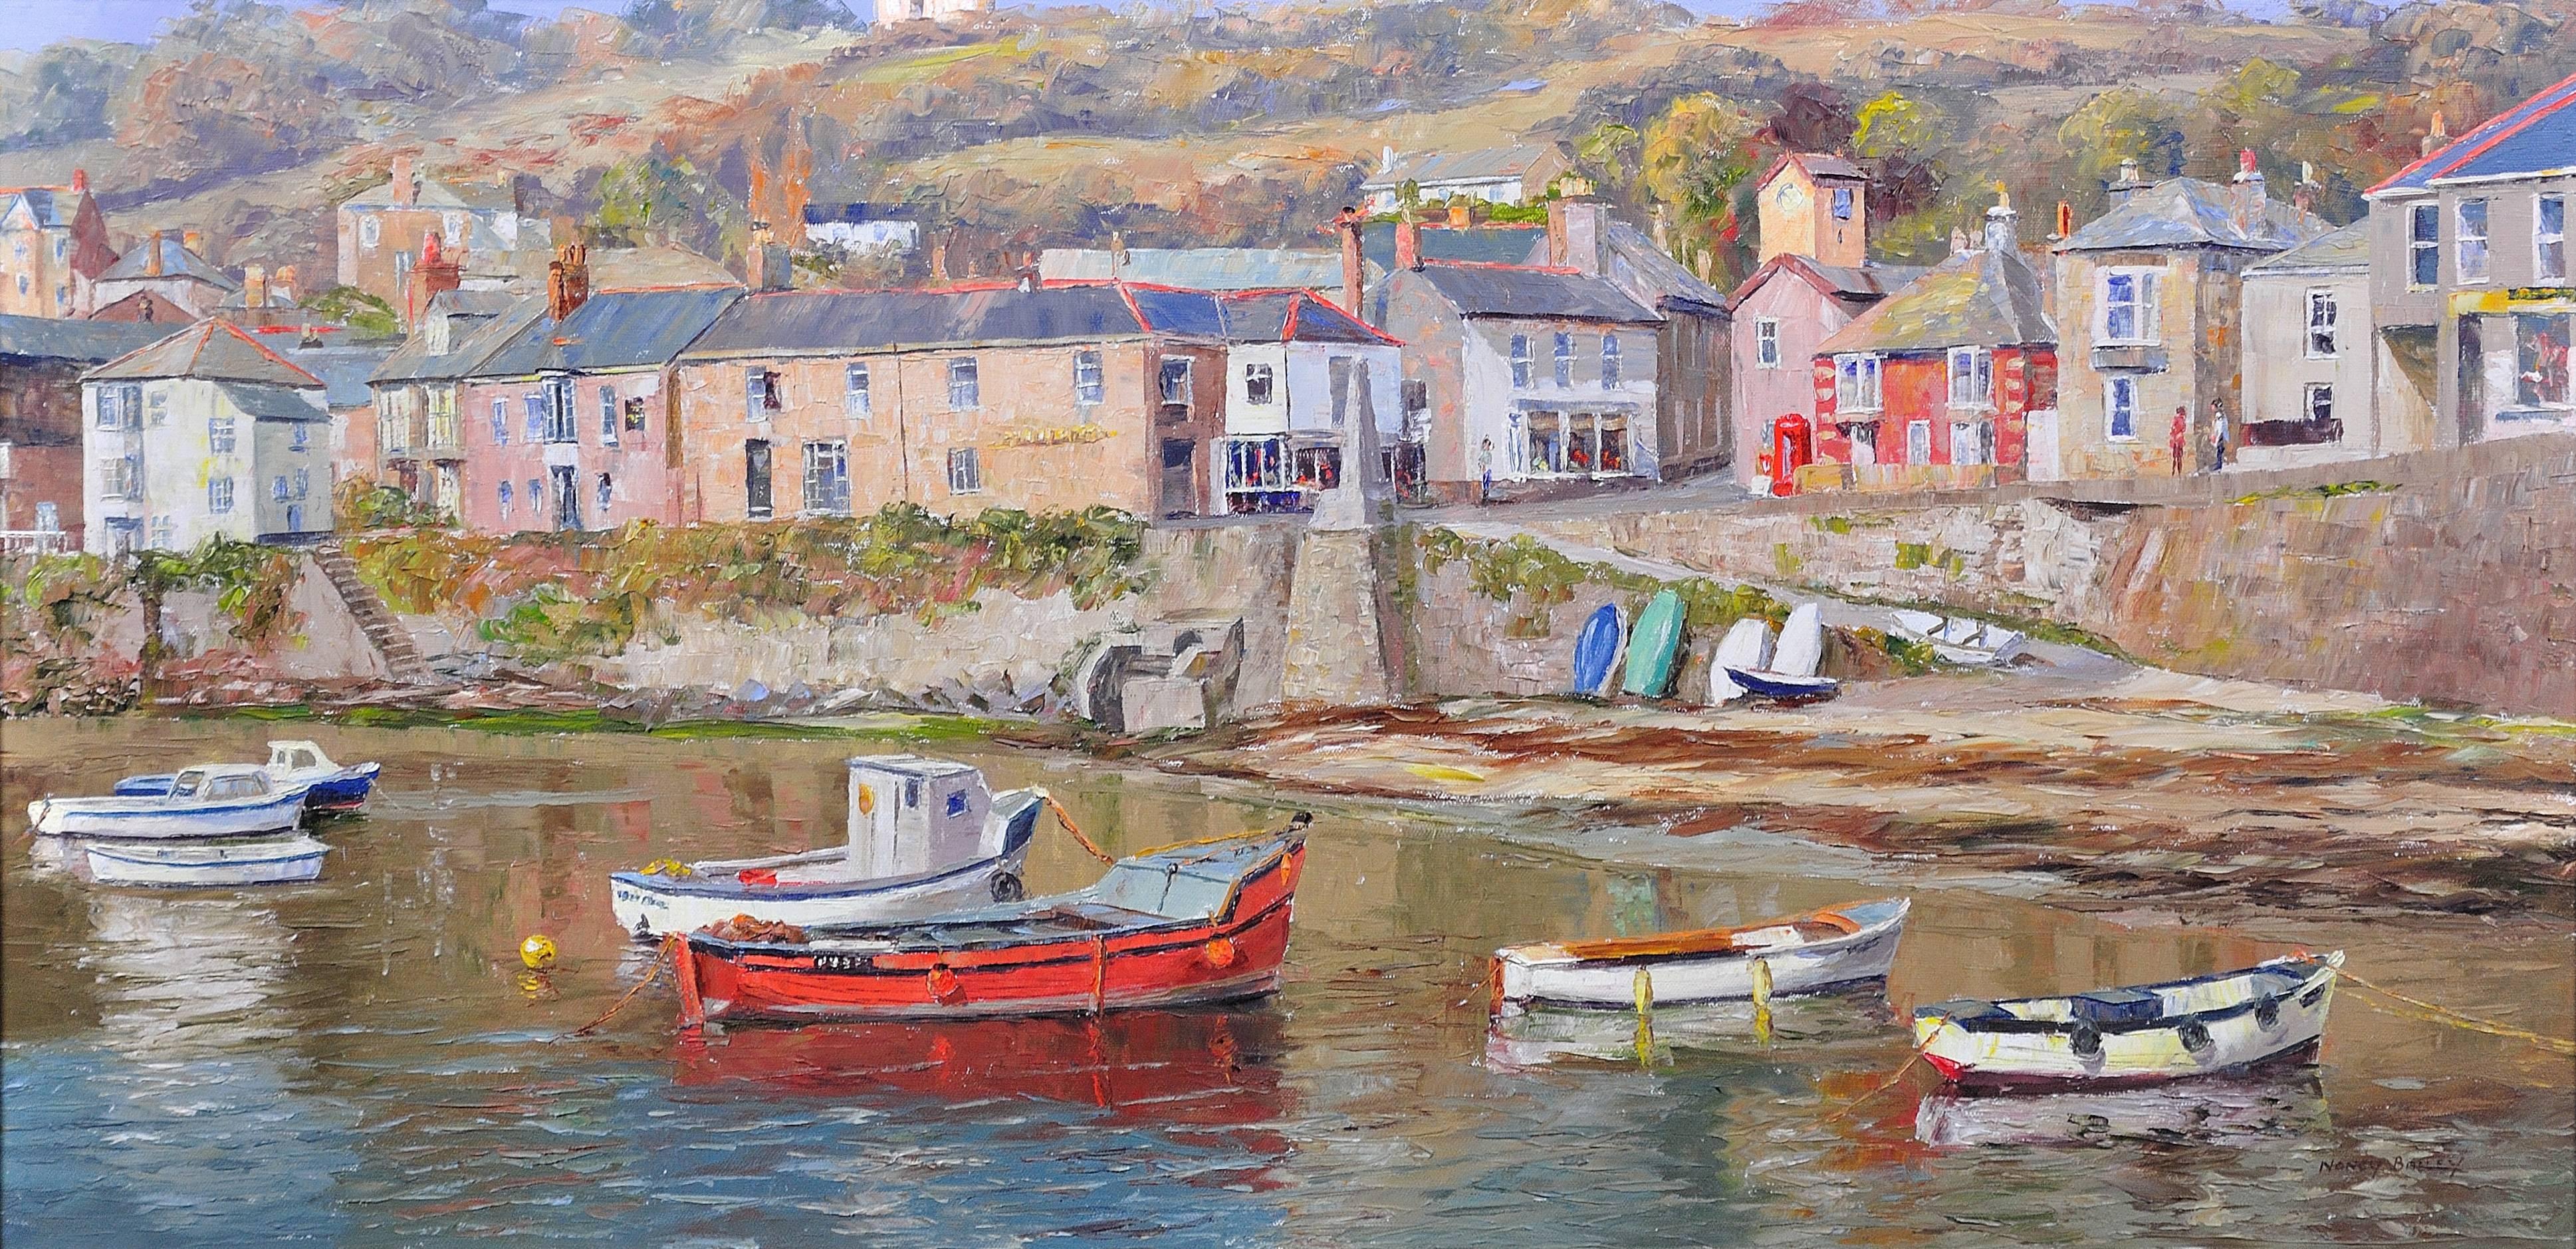 Waterfront, Mousehole, Cornwall - Painting by Nancy Bailey